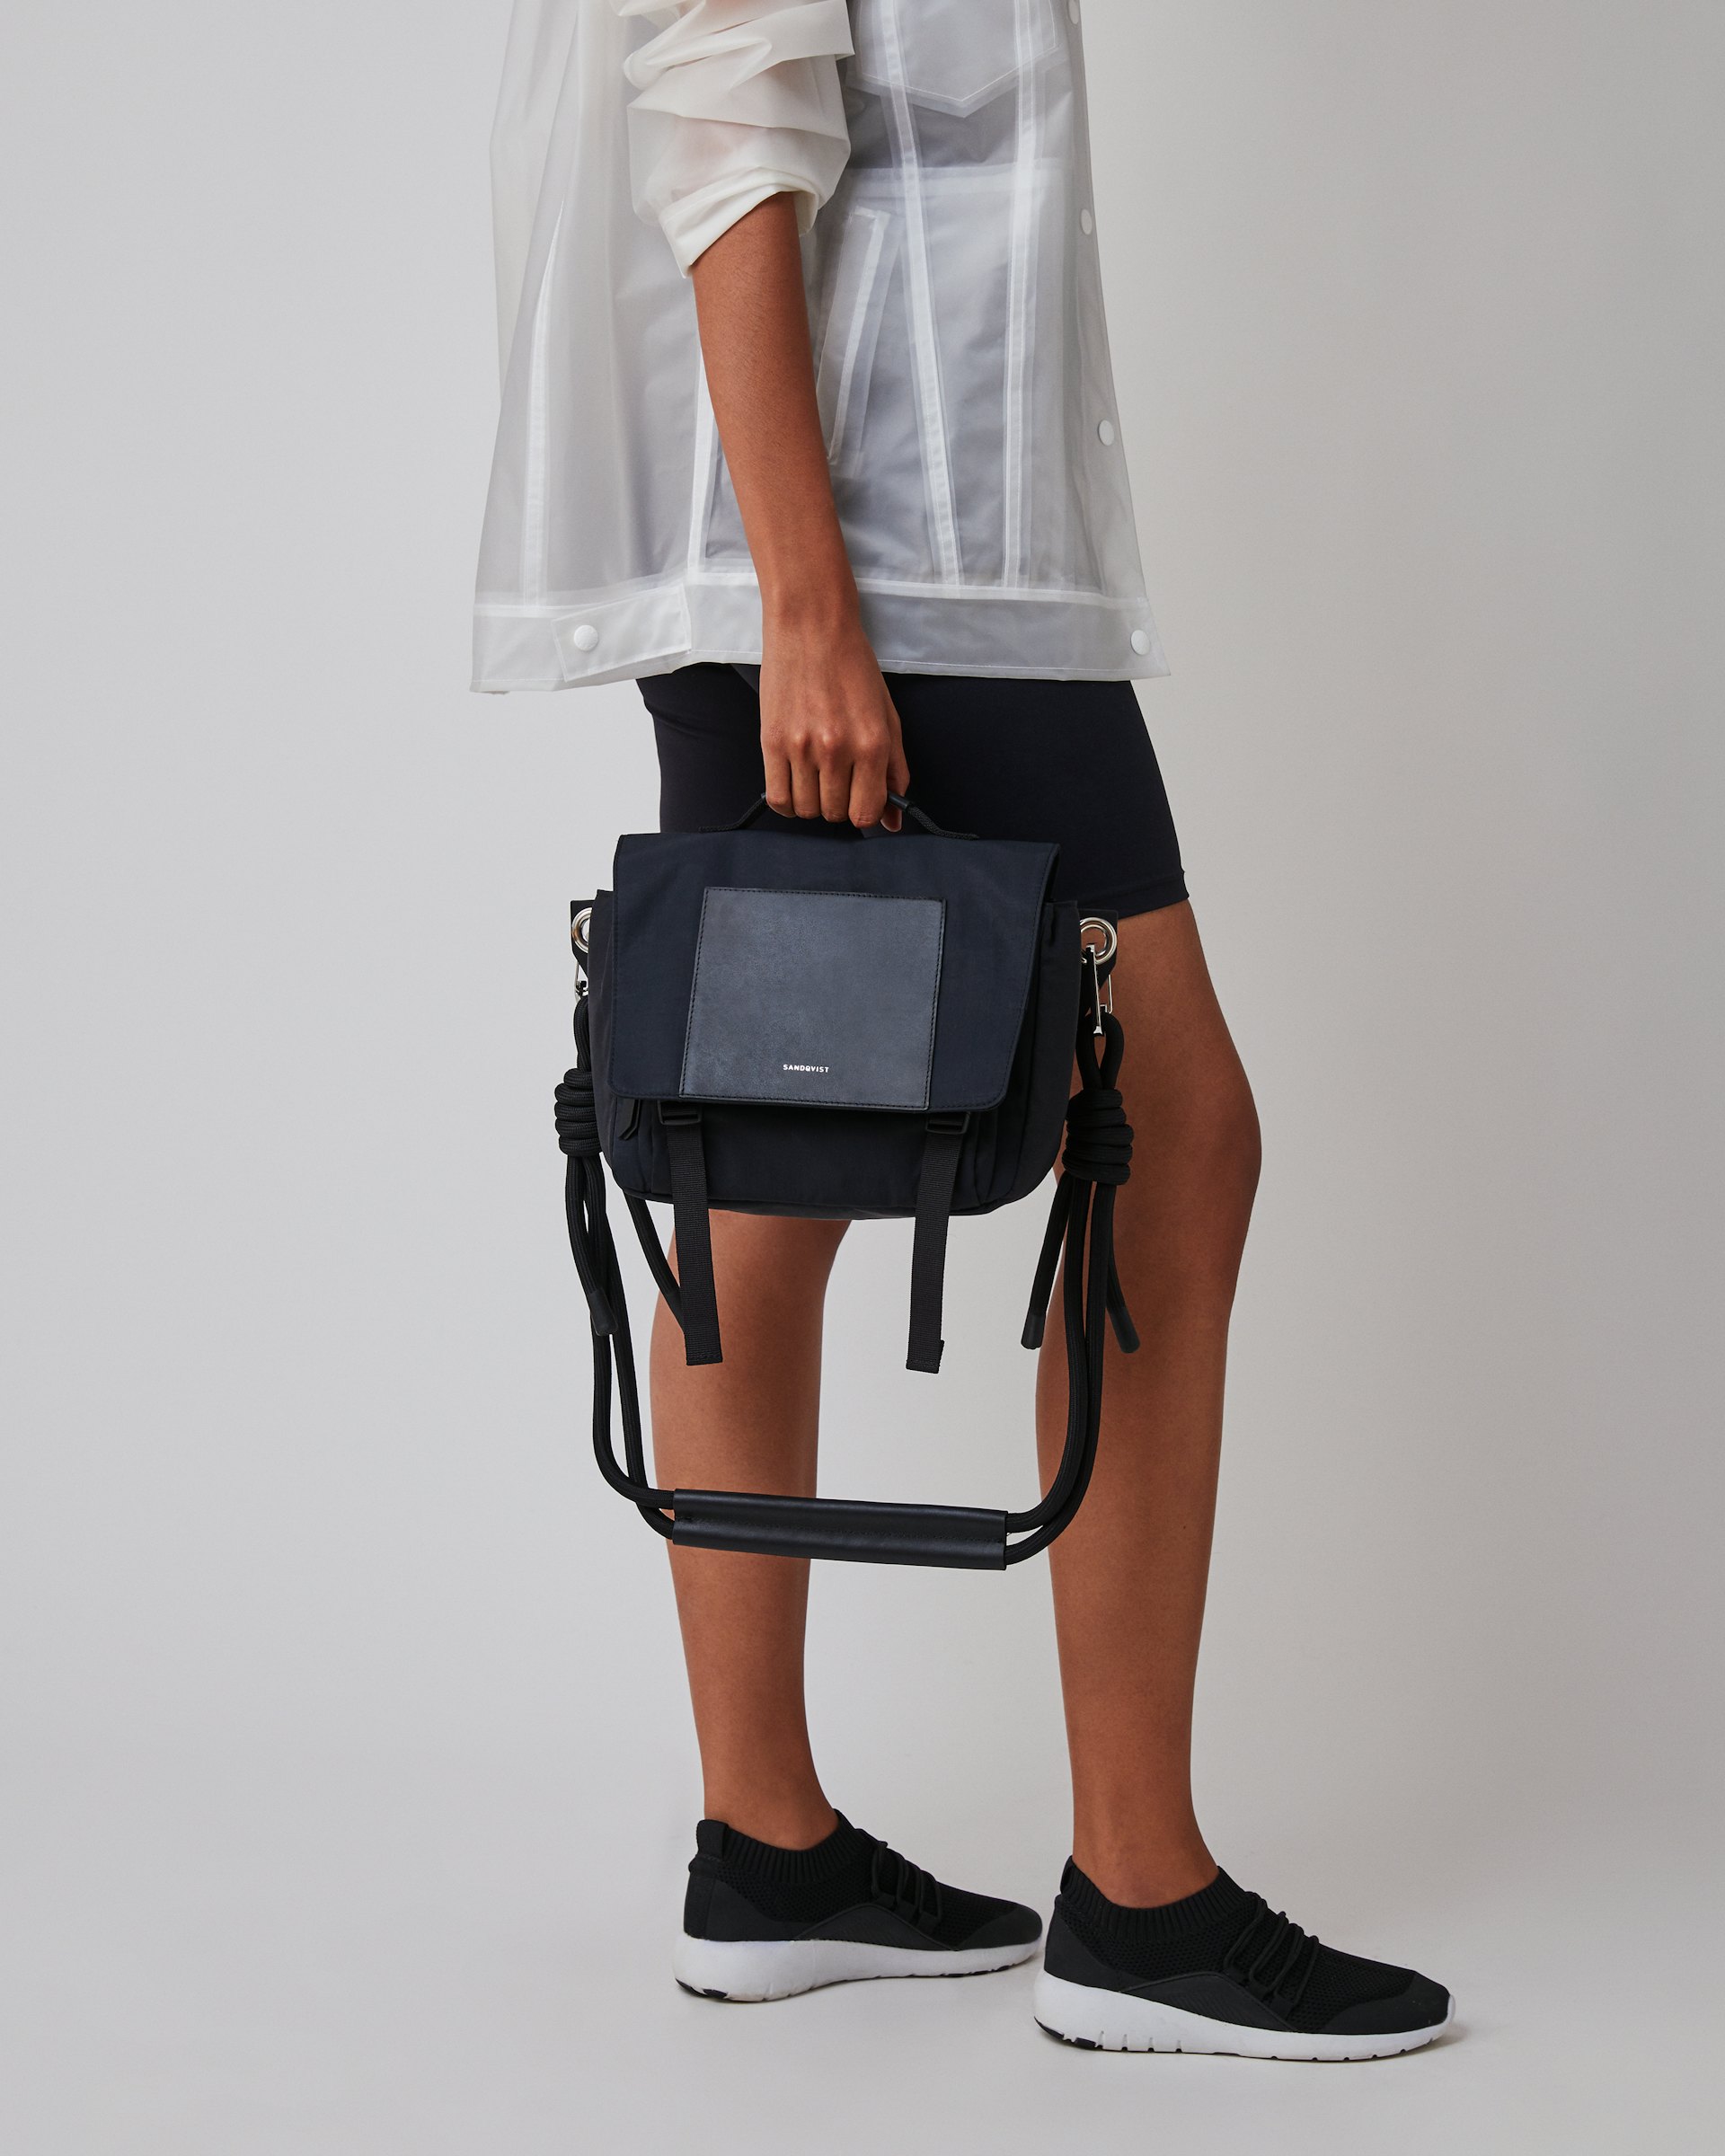 Solveig belongs to the category Shoulder bags and is in color black (7 of 7)